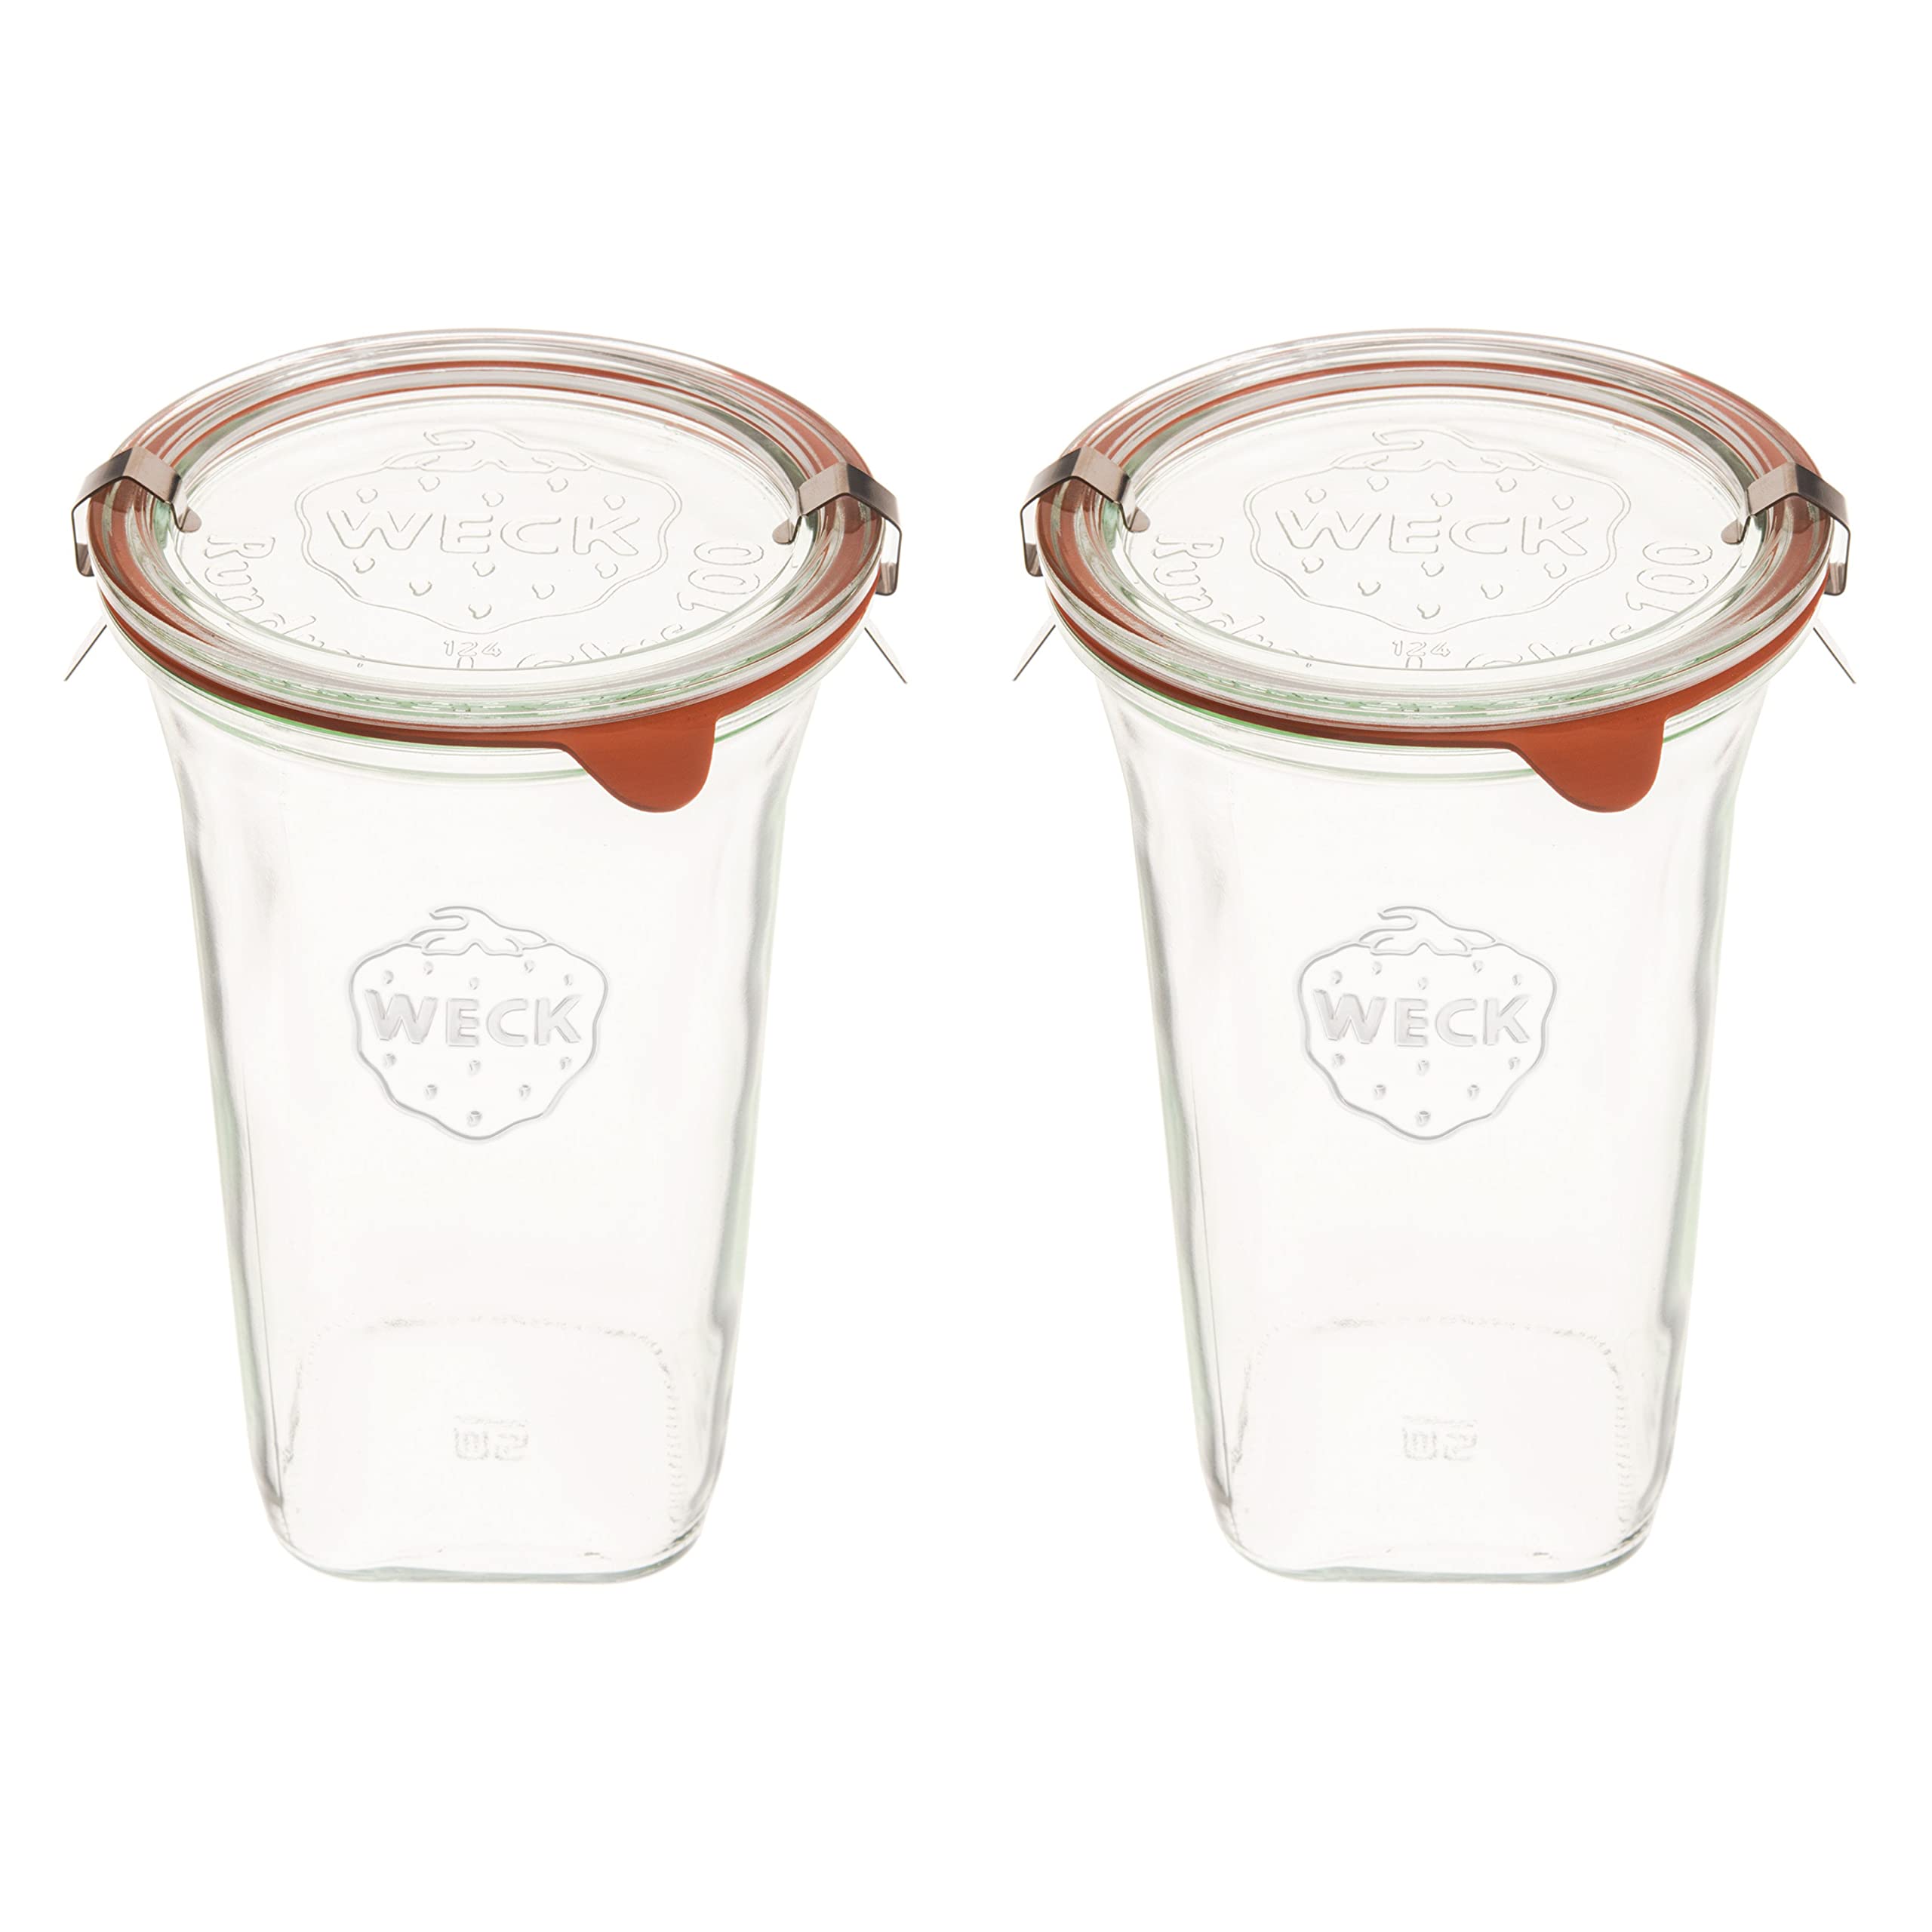 Weck Jars Large Quadro 769 Jars Made of Transparent glass Eco-Friendly canning Jar Food Storage containers with Airtight Lids Ma